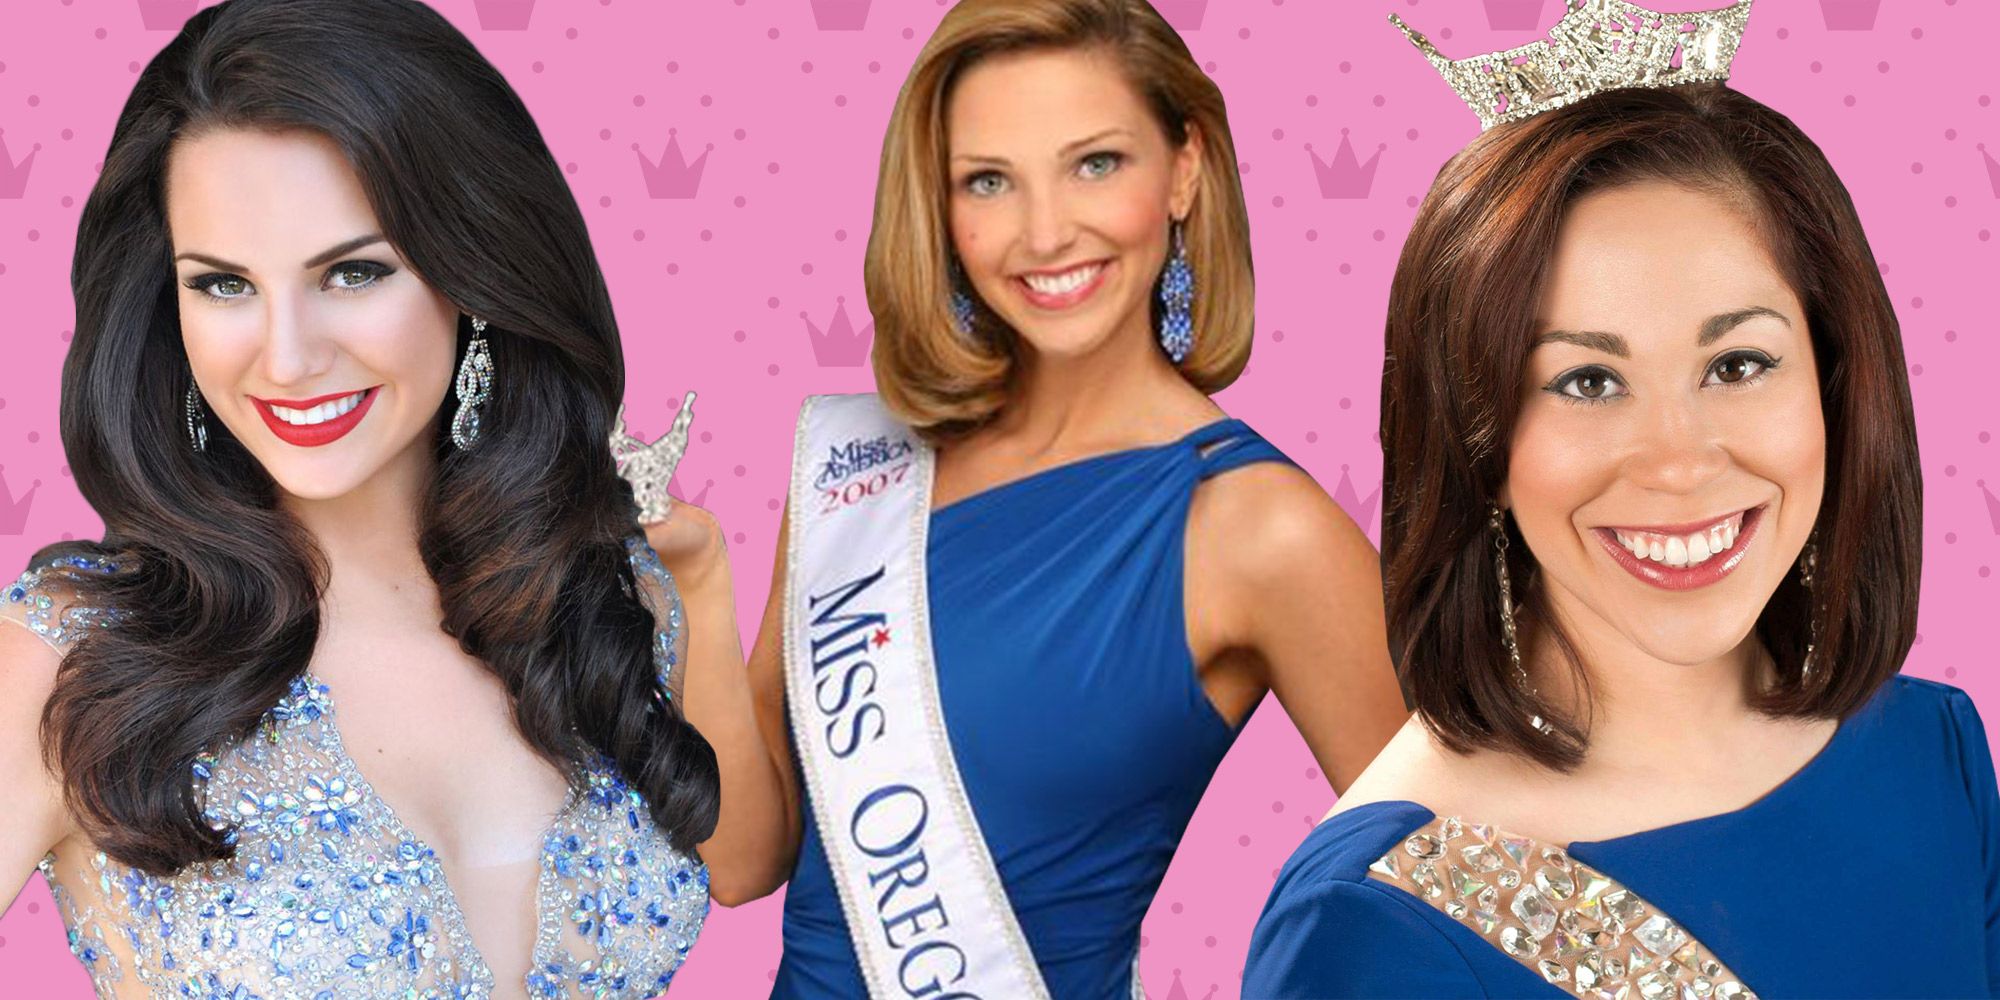 12 Beauty Secrets From Real Pageant Queens - Pageant Queen Makeup